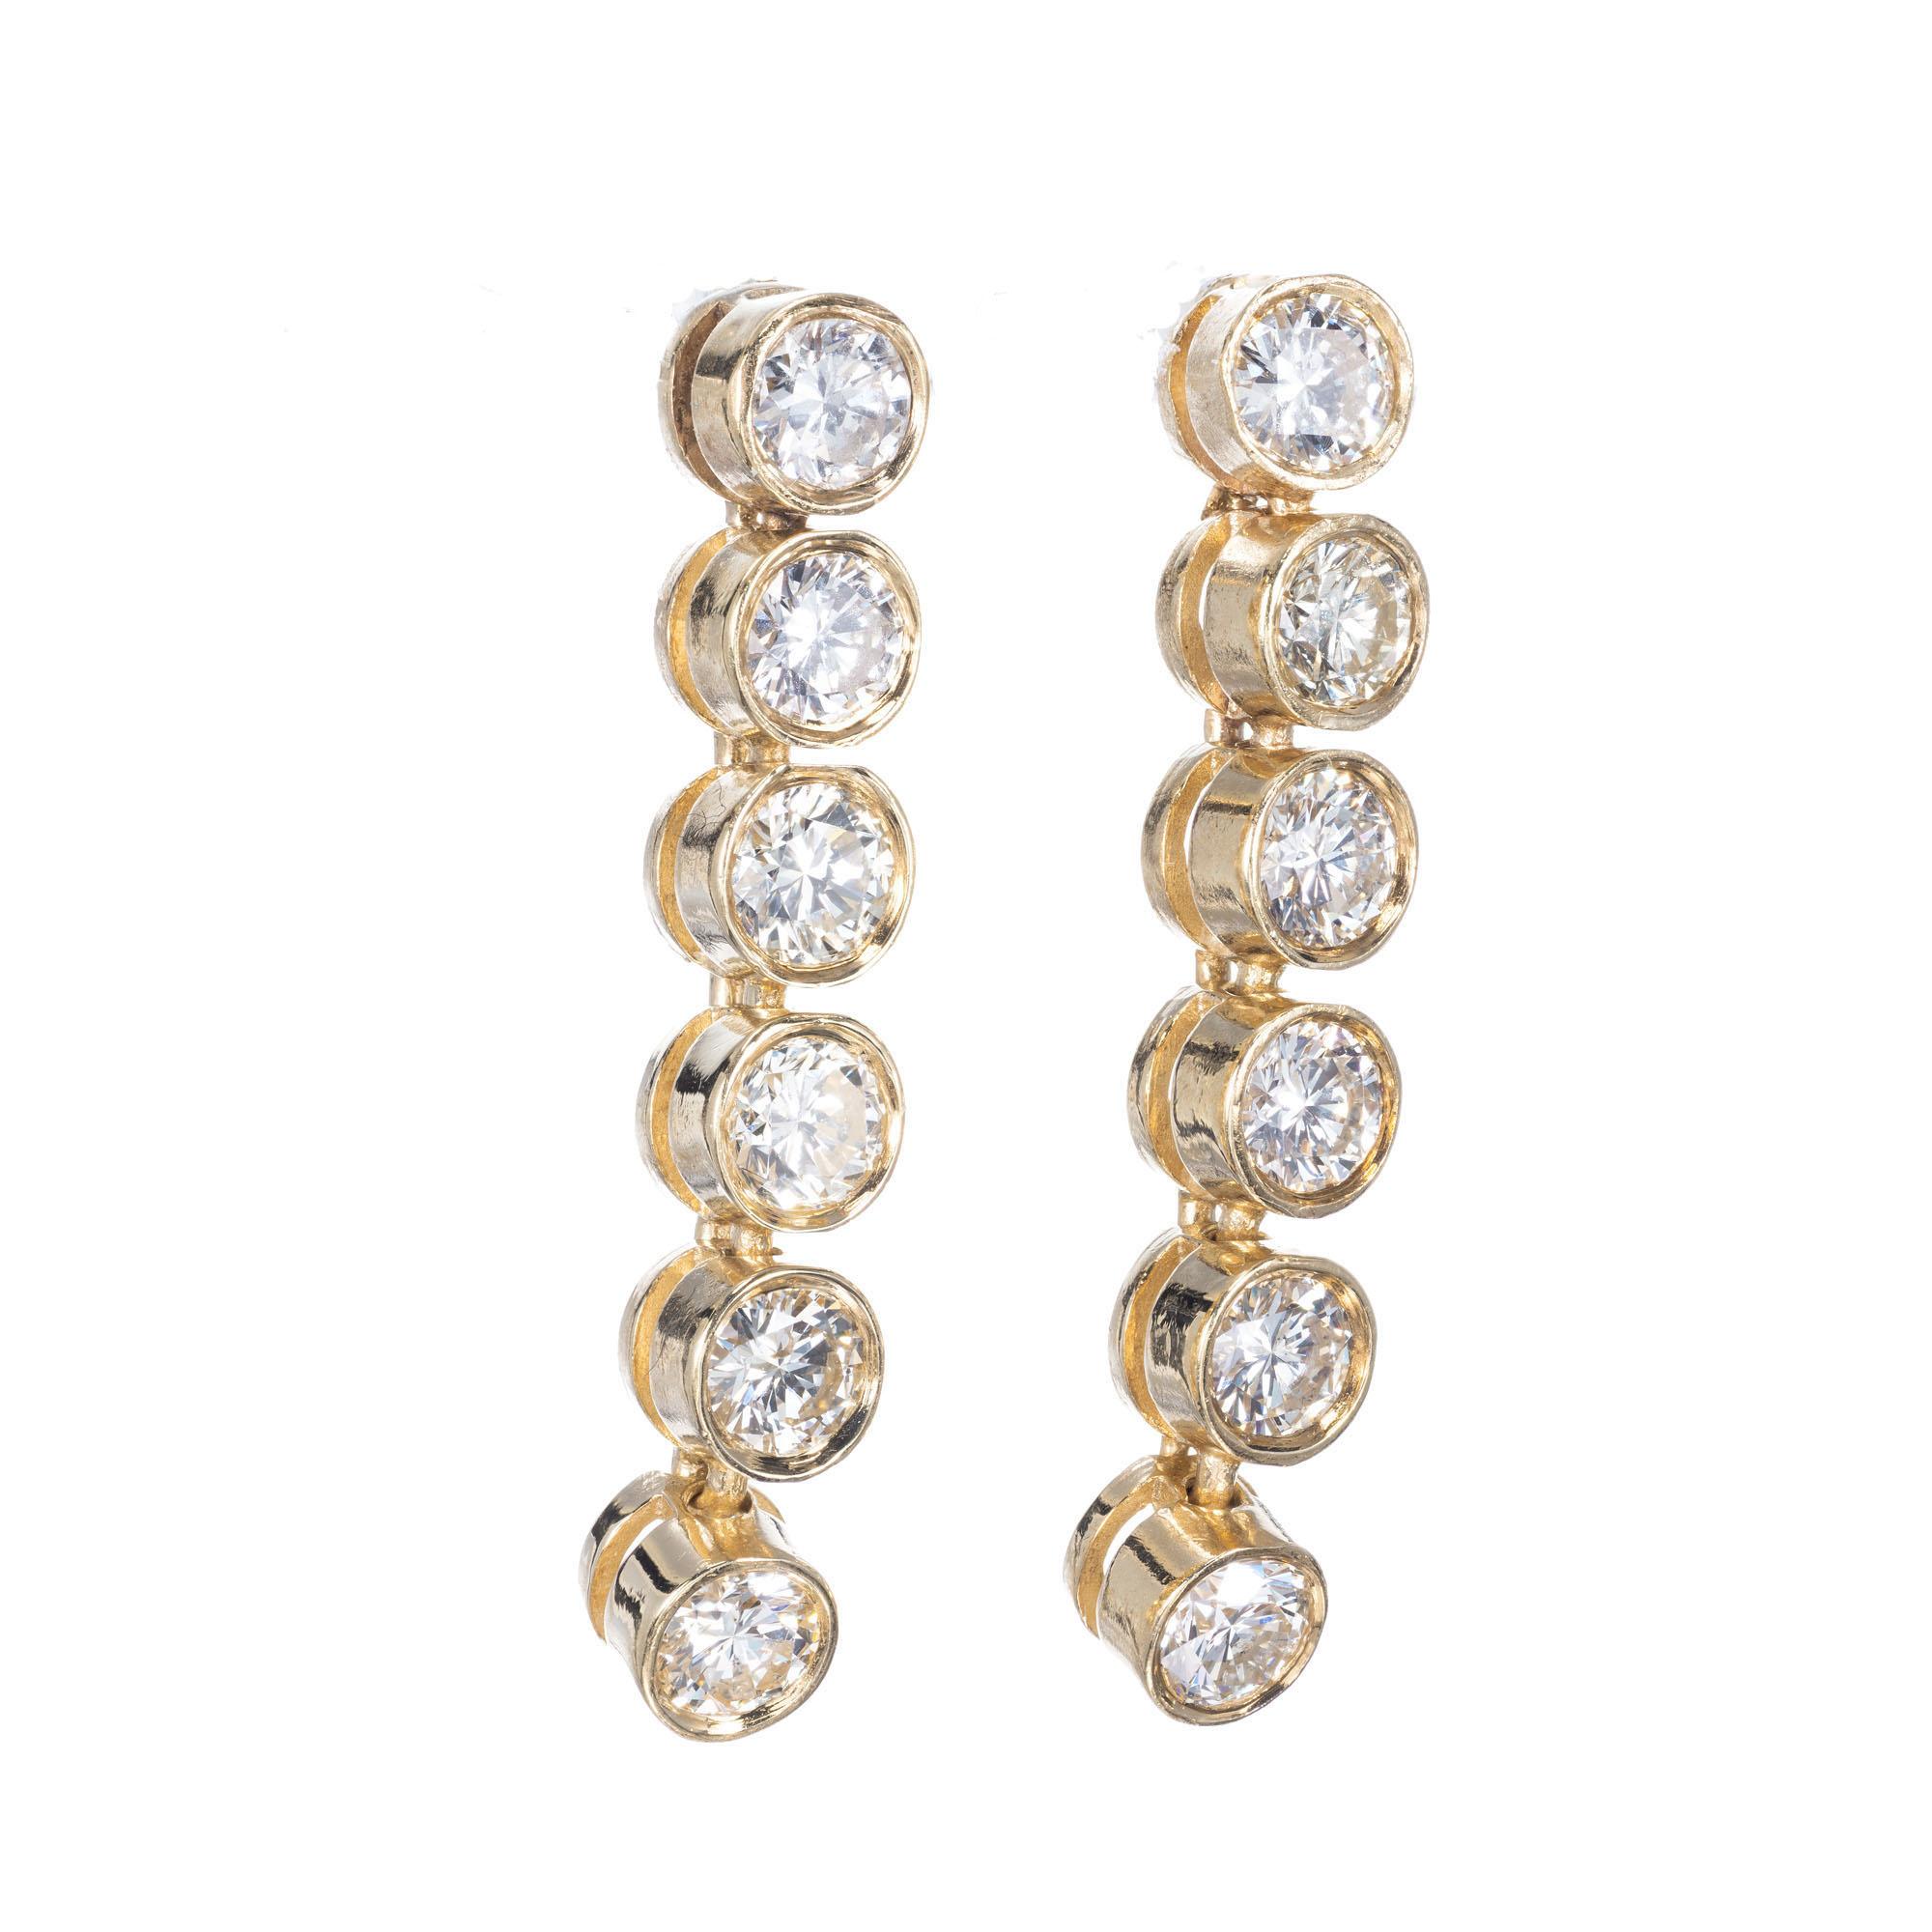 One Inch long tube set diamond dangle earrings with post tops set with nice full cut diamonds. 

12 full cut diamonds, .07ct each, approx. total weight .75ct
14k yellow gold 
Tested: 14k
3.5 grams
Top to bottom: 25mm or 1 inch
Width: 4mm
Depth: